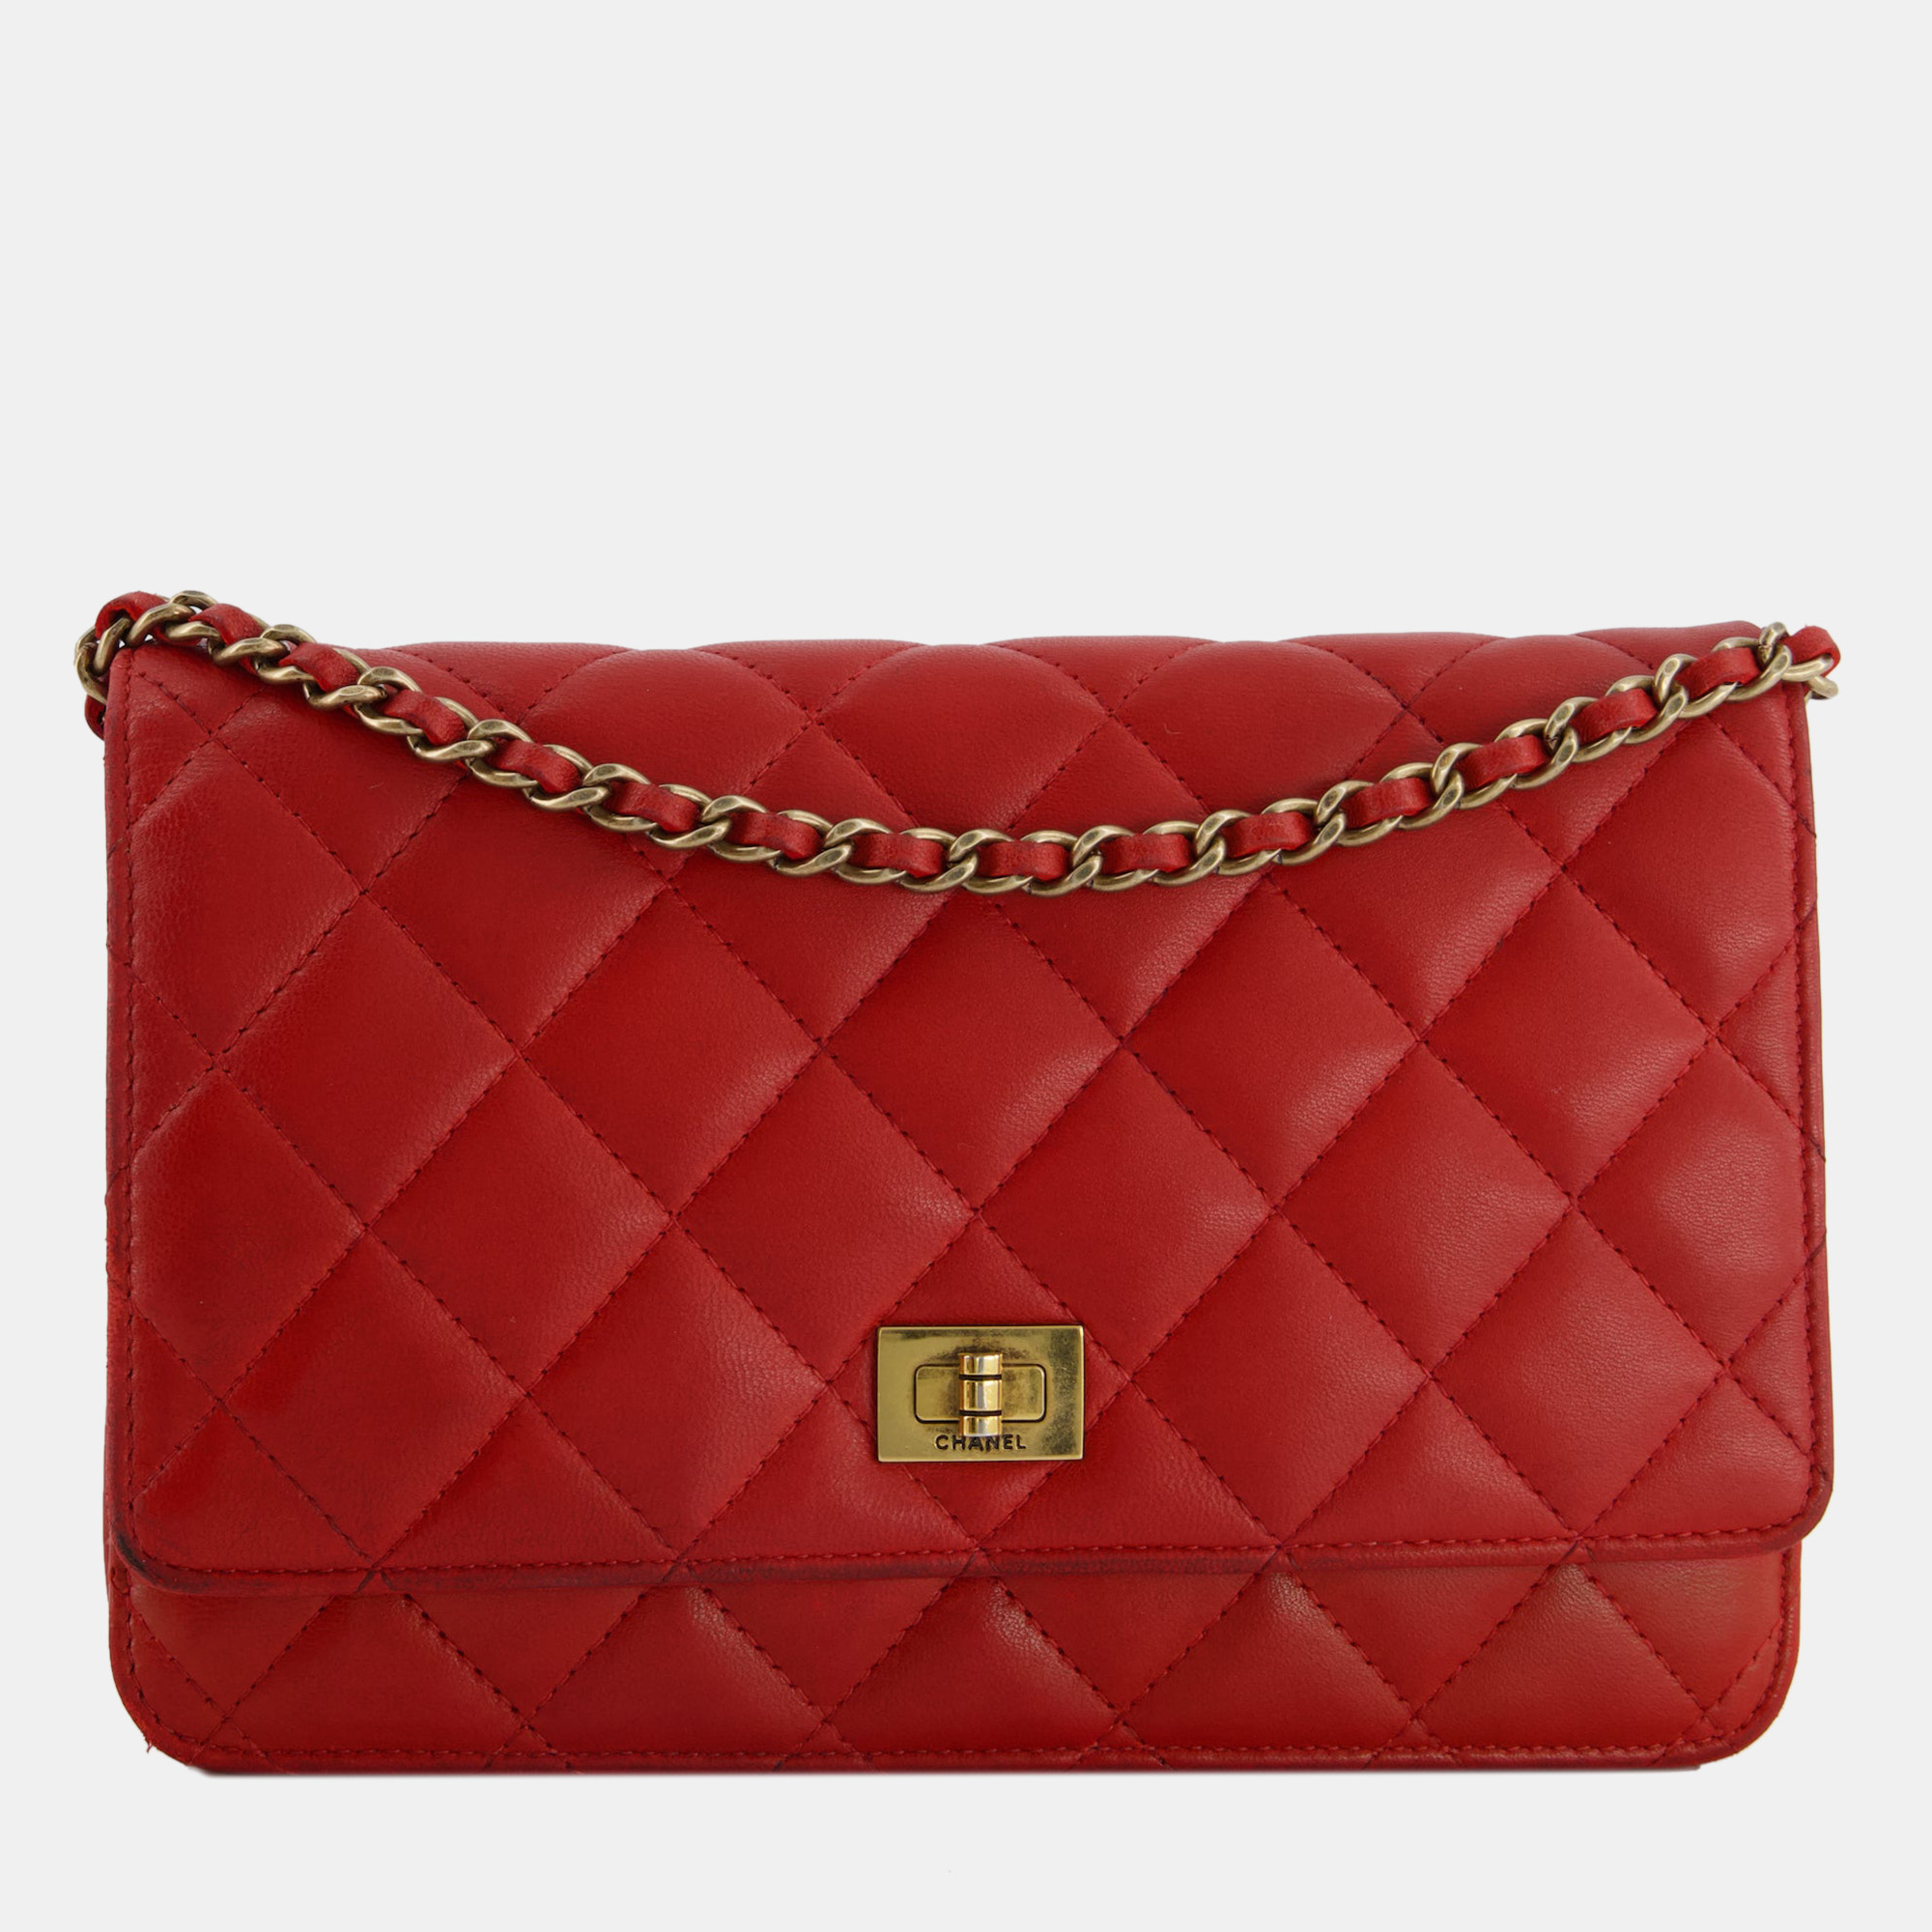 Chanel red 2.55 wallet on chain in lambskin leather with champagne gold hardware